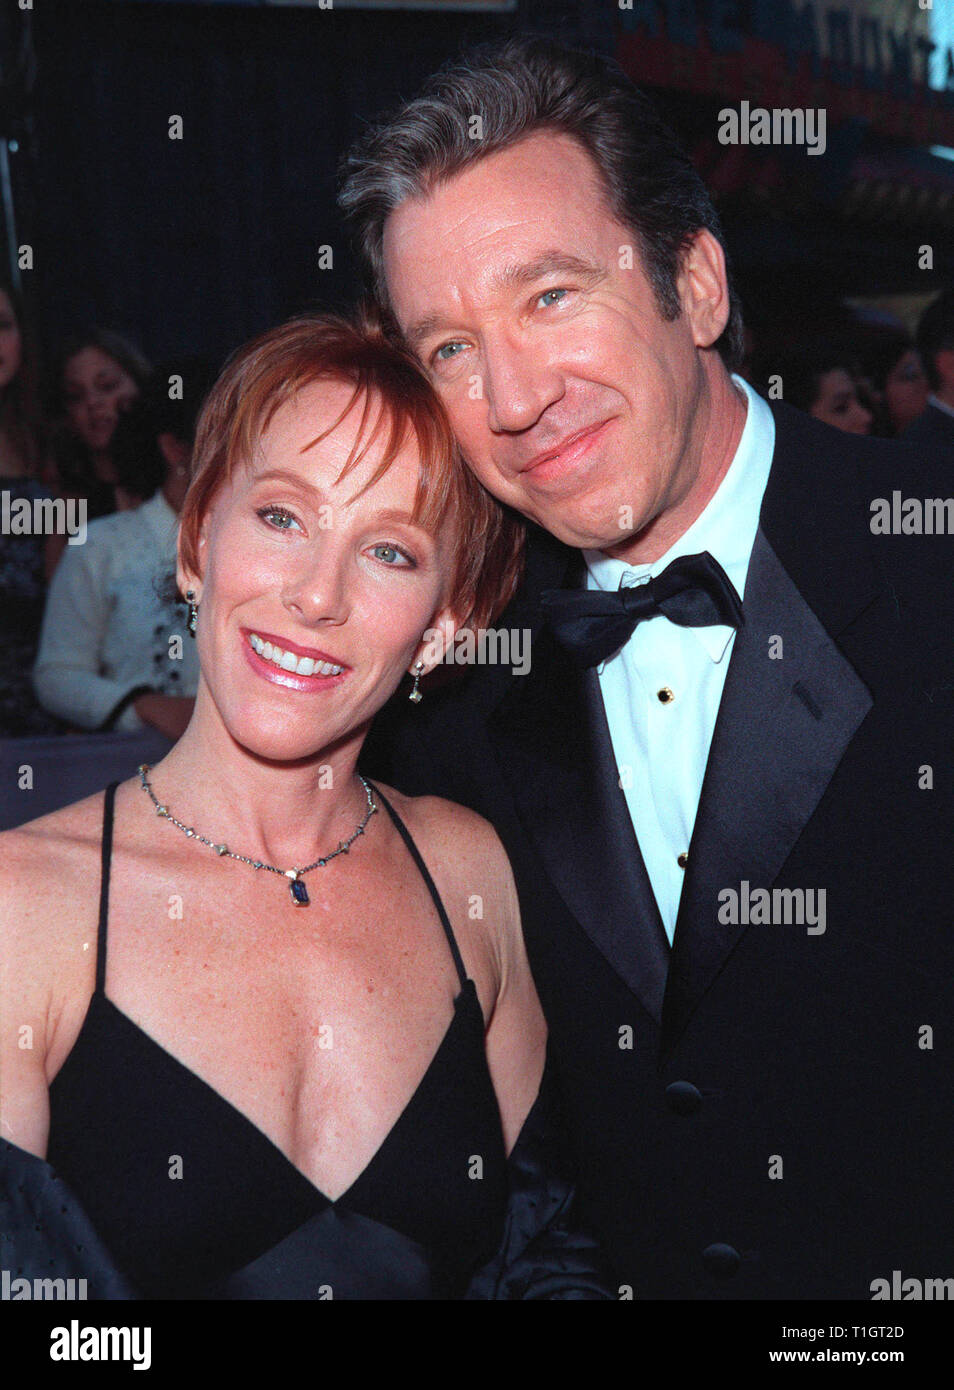 LOS ANGELES, CA - February 2, 1999:  'Home Improvement' star TIM ALLEN & wife at the 1st Annual TV Guide Awards in Los Angeles.  © Paul Smith / Featureflash Stock Photo